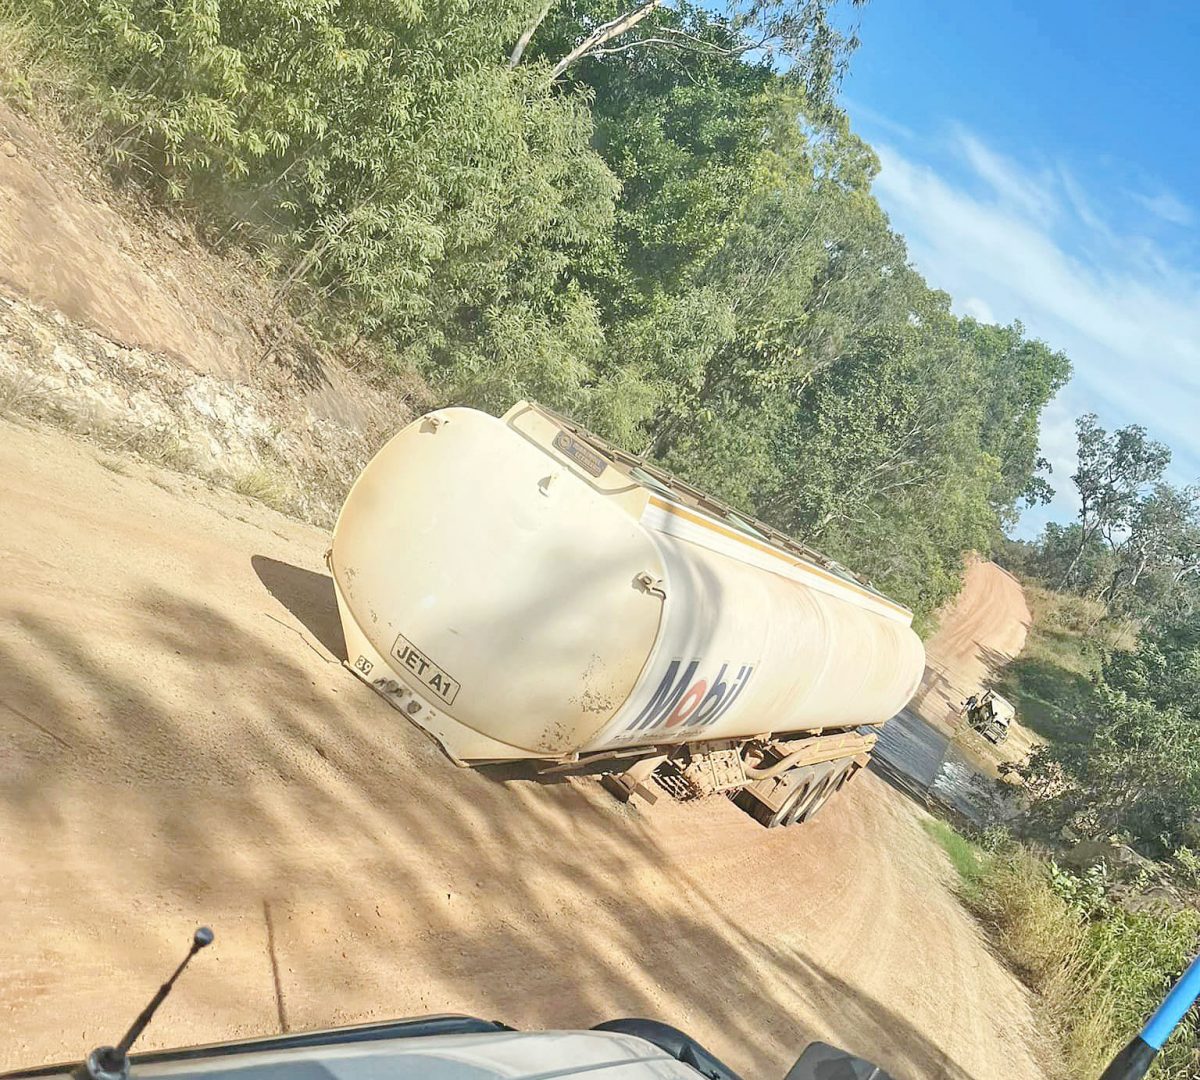 A fuel tanker was left on the Lockhart River access road on Thursday.